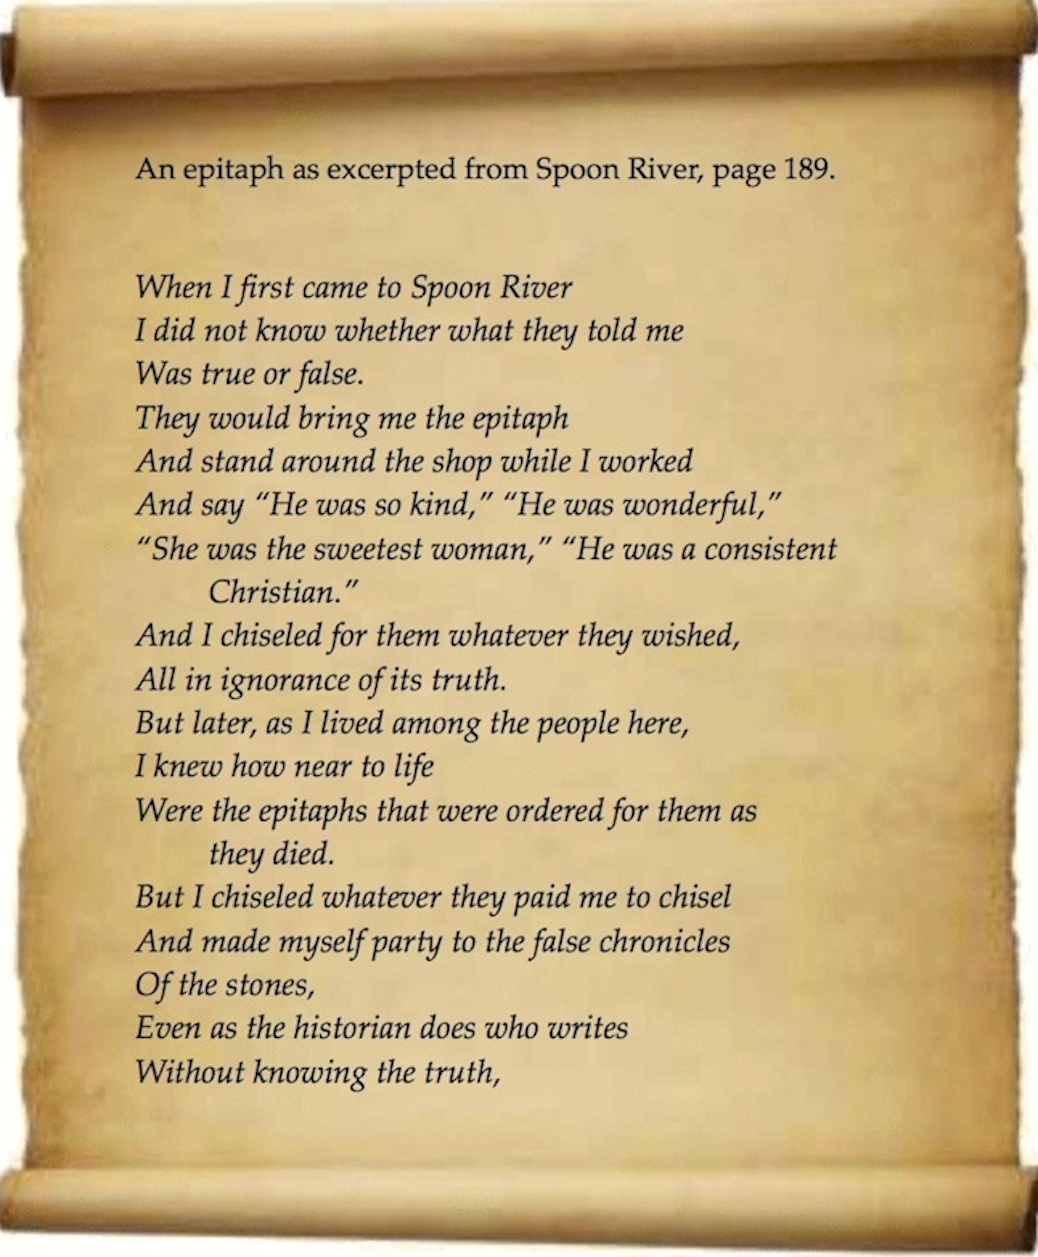 An epitaph from Spoon River